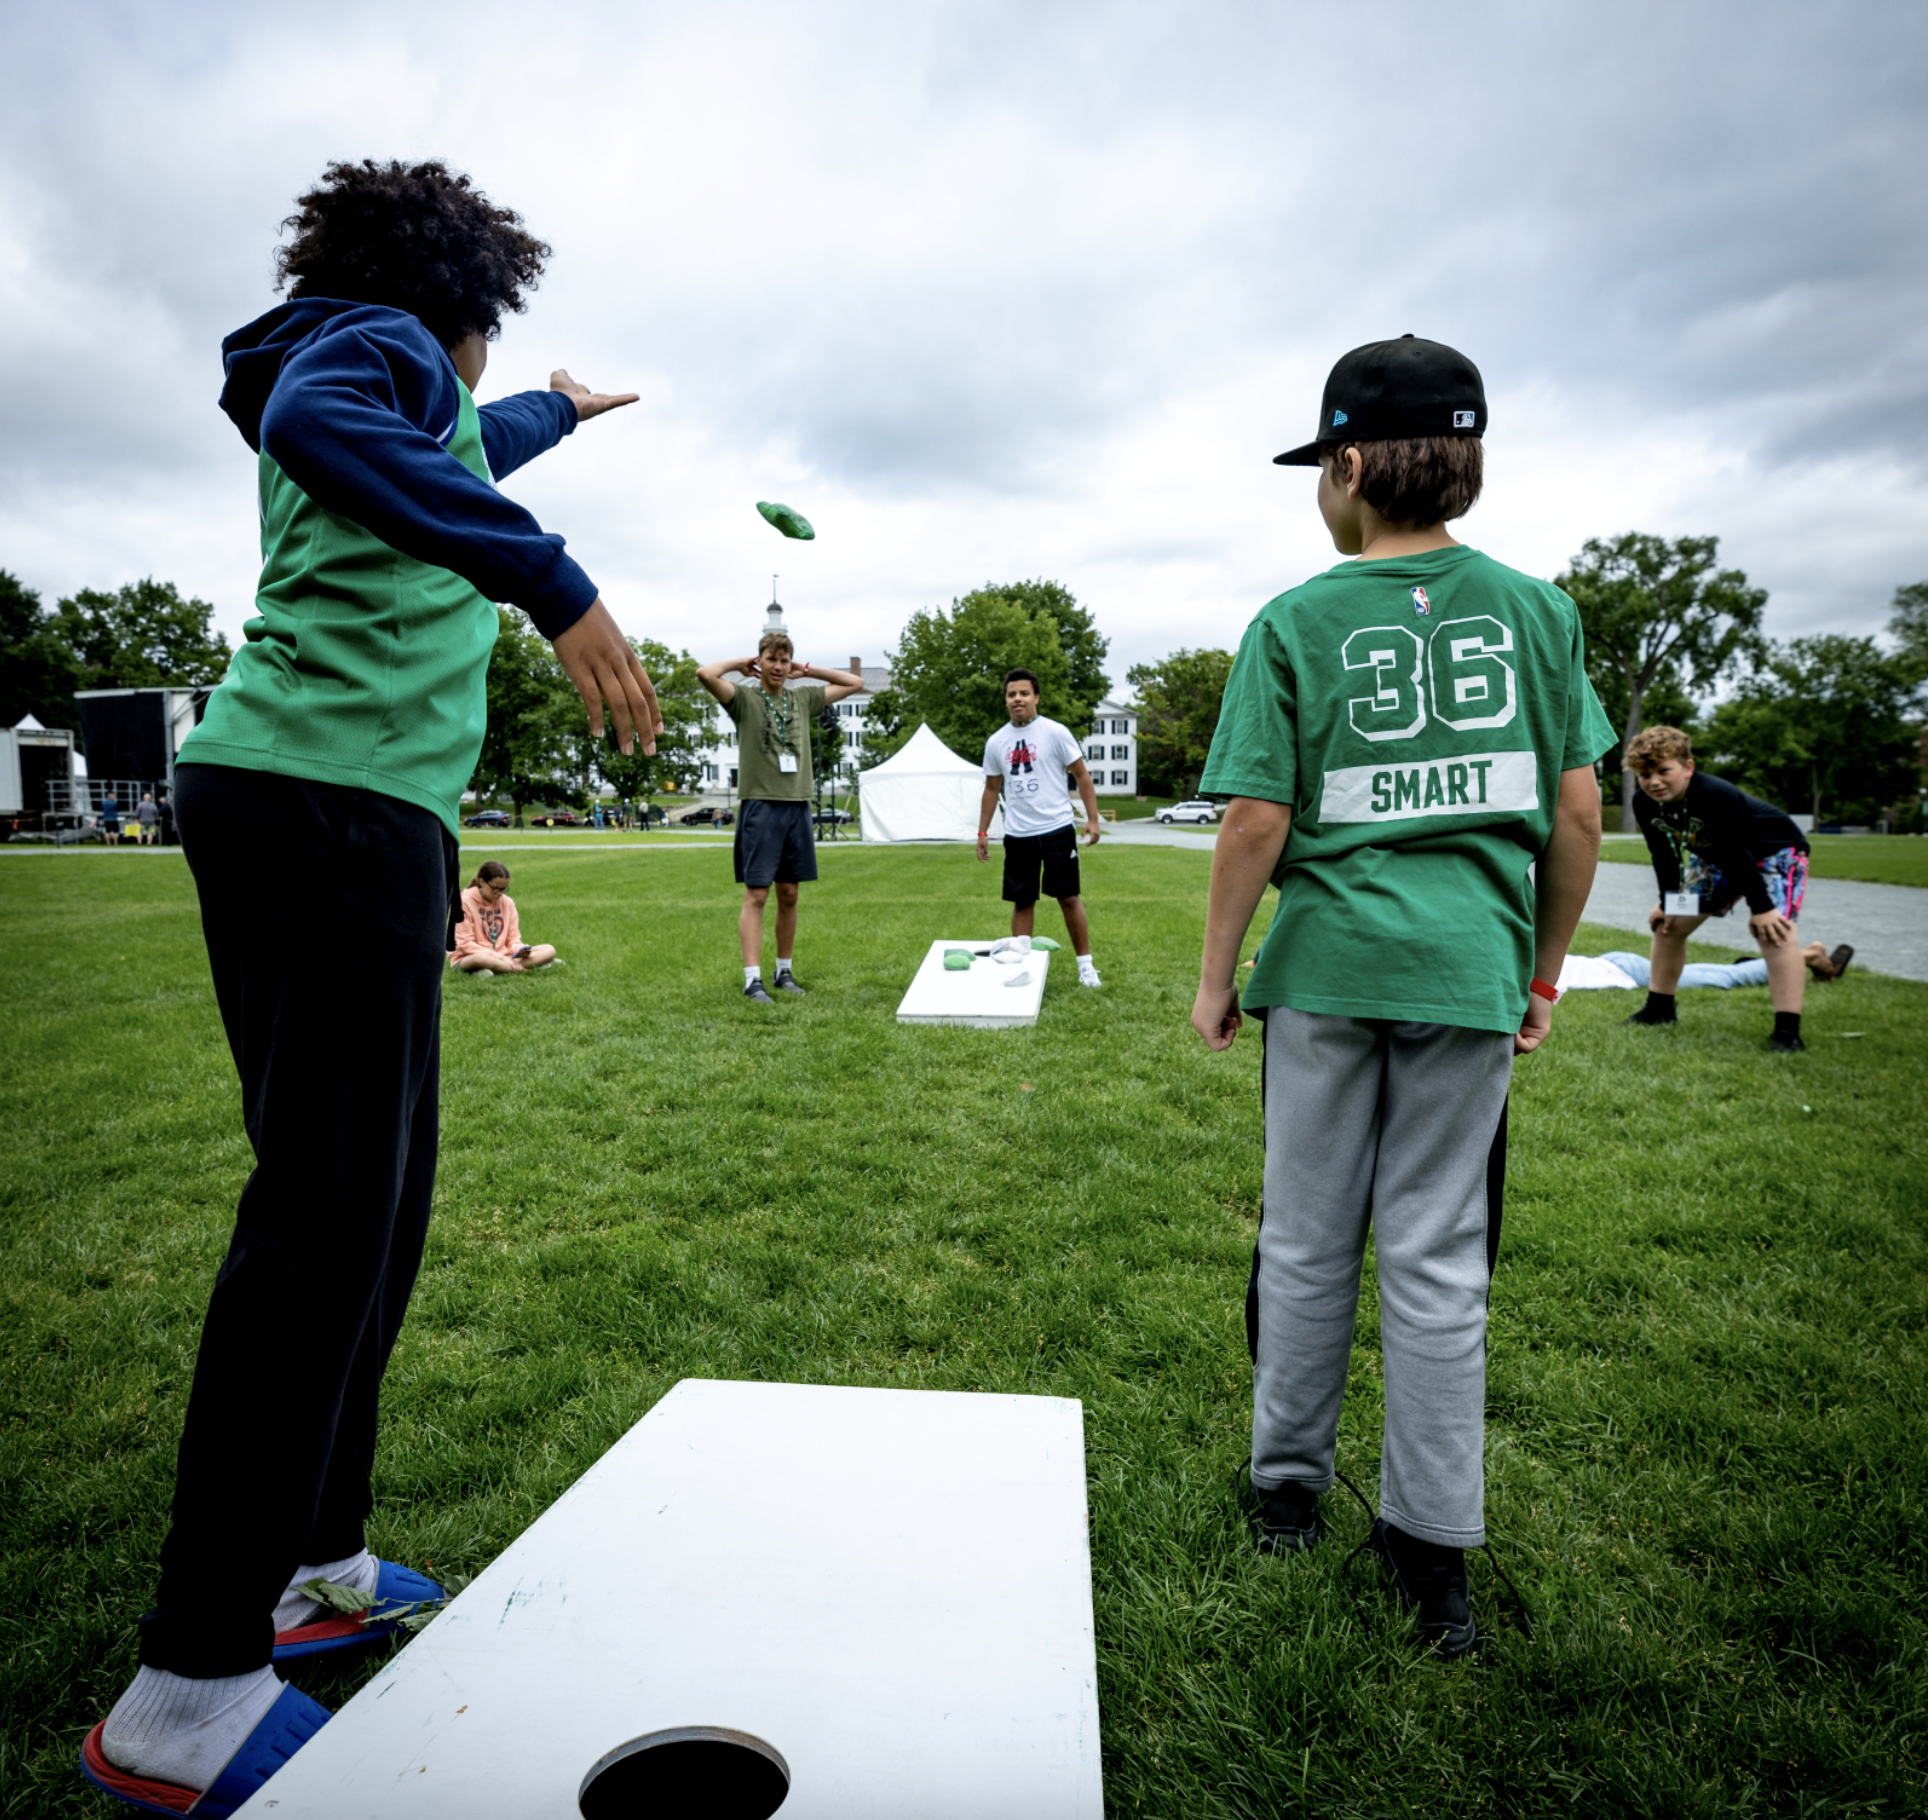 A woman and child dressed in Dartmouth gear playing cornhole on the green.